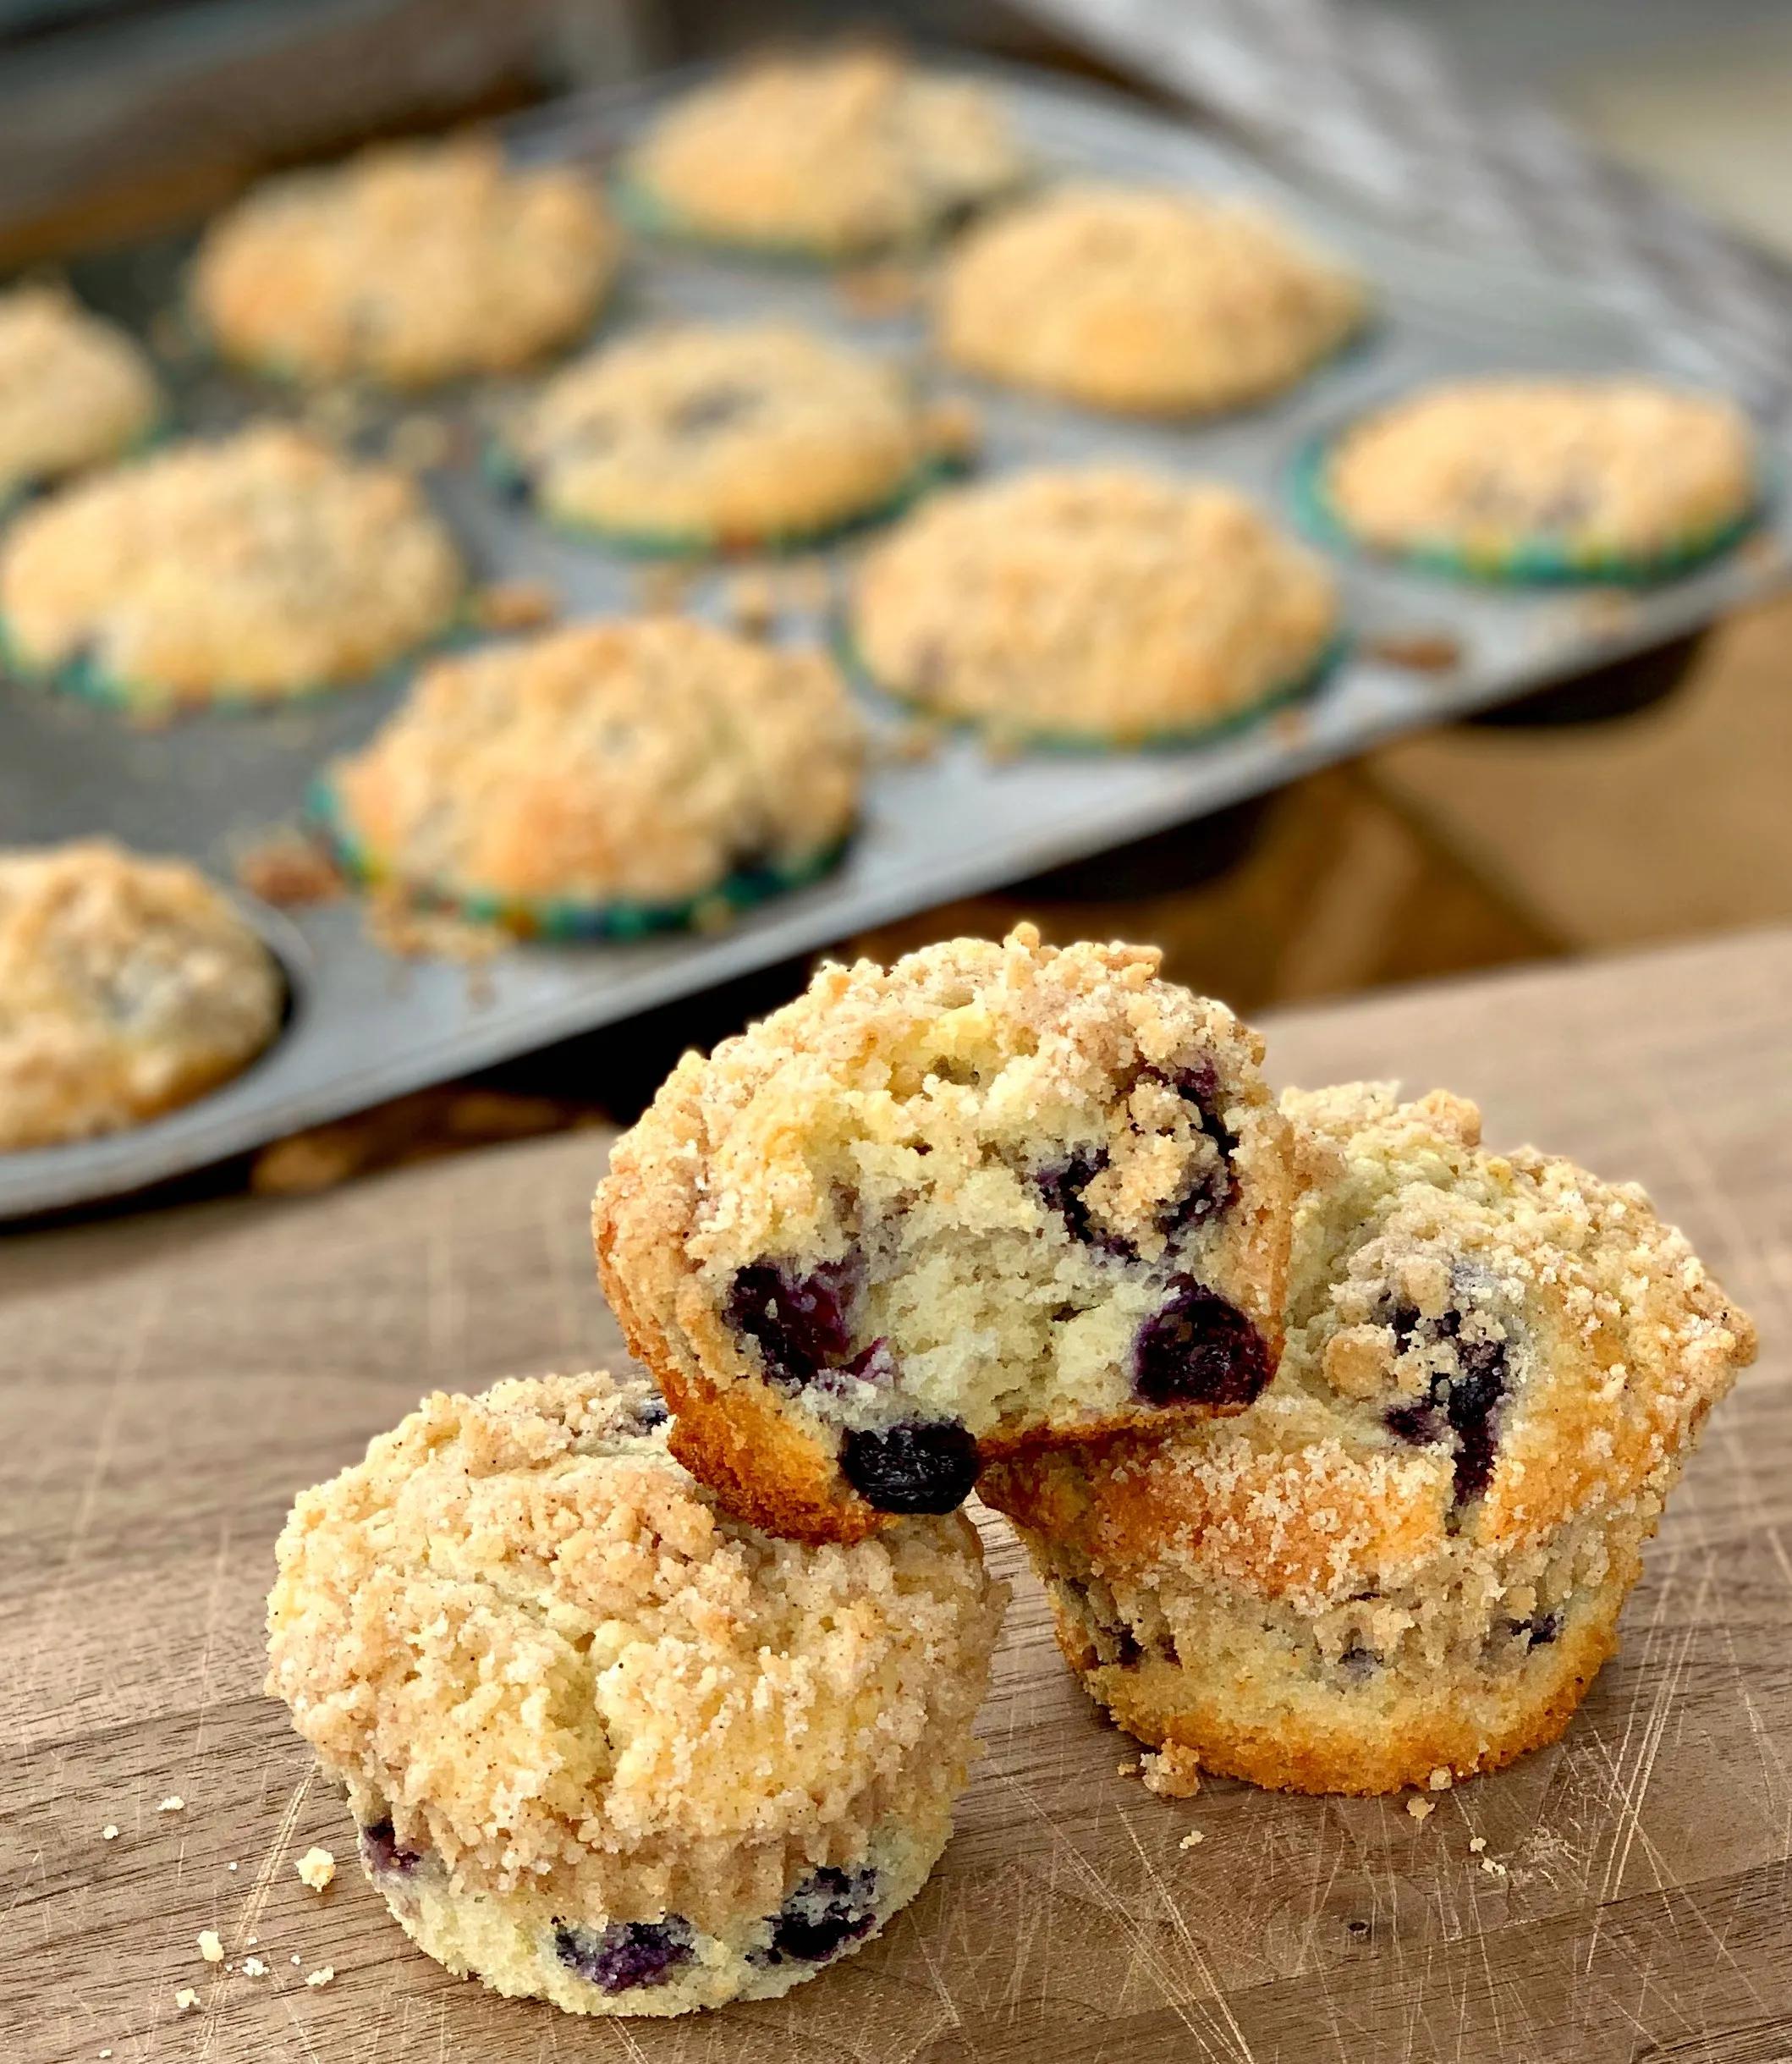 Streusel Topped Blueberry Muffins - The Cookin Chicks